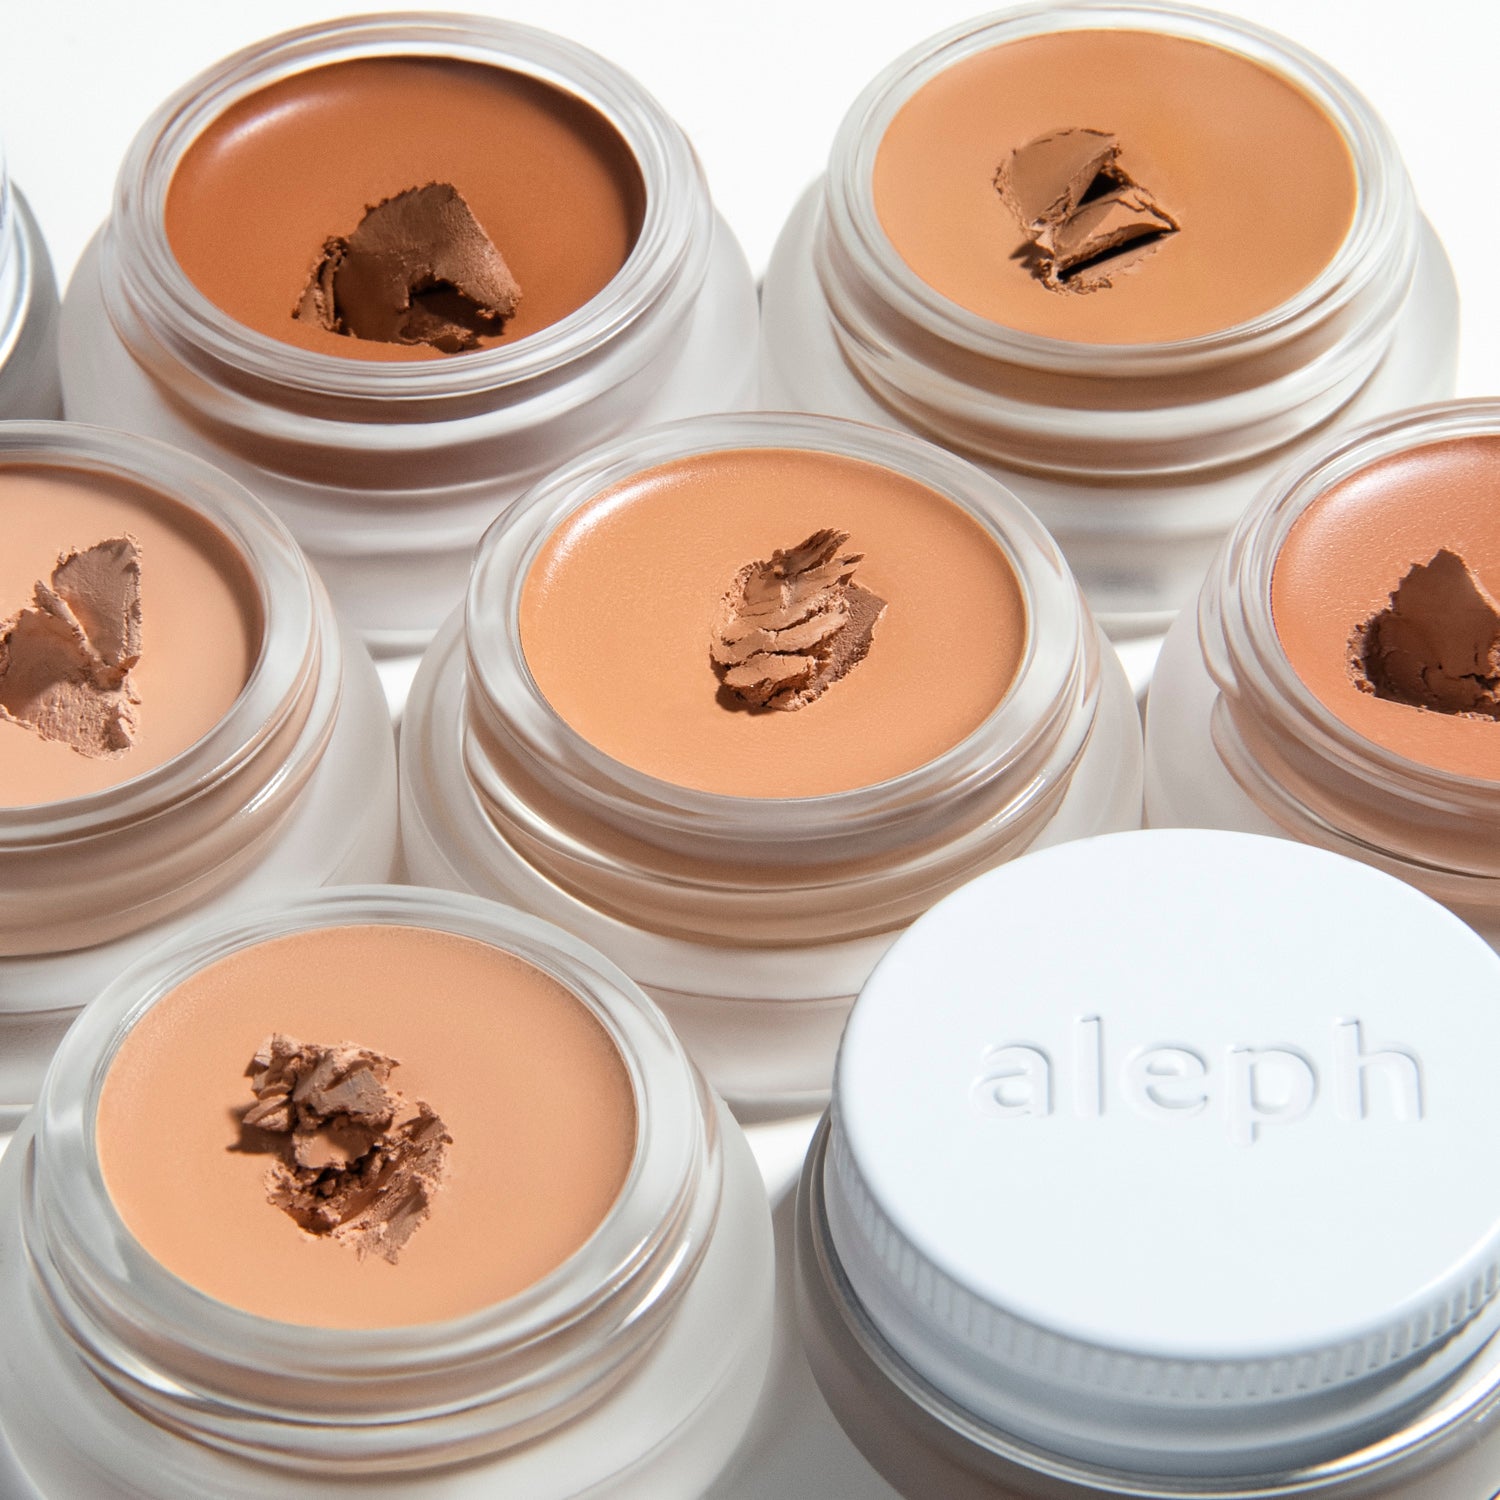 3 Reasons why Concealer/Foundation is the most sustainable!